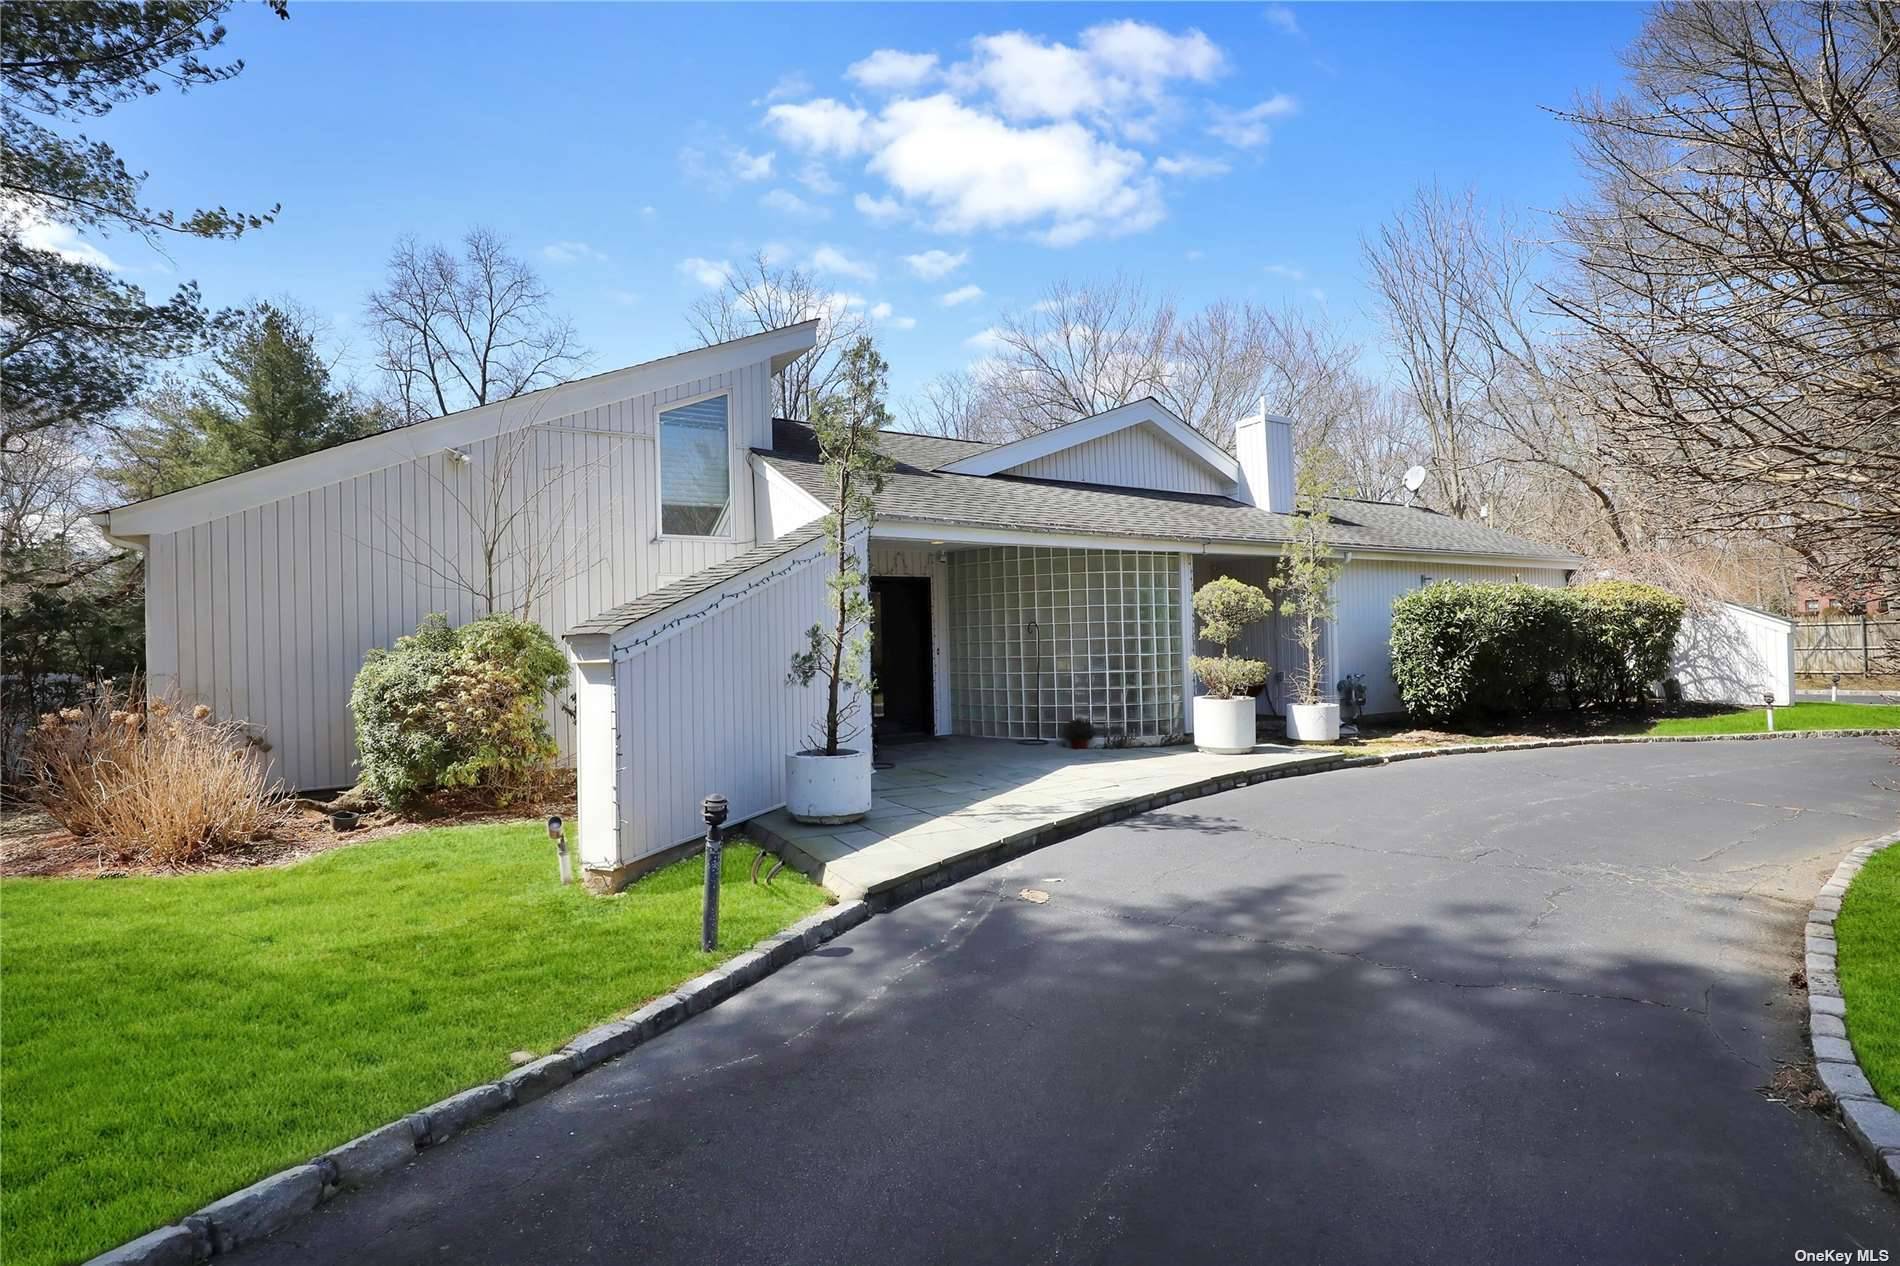 Welcome to this Mesmerizing Contemporary Home in Woodbury spread on 1 Acre land.